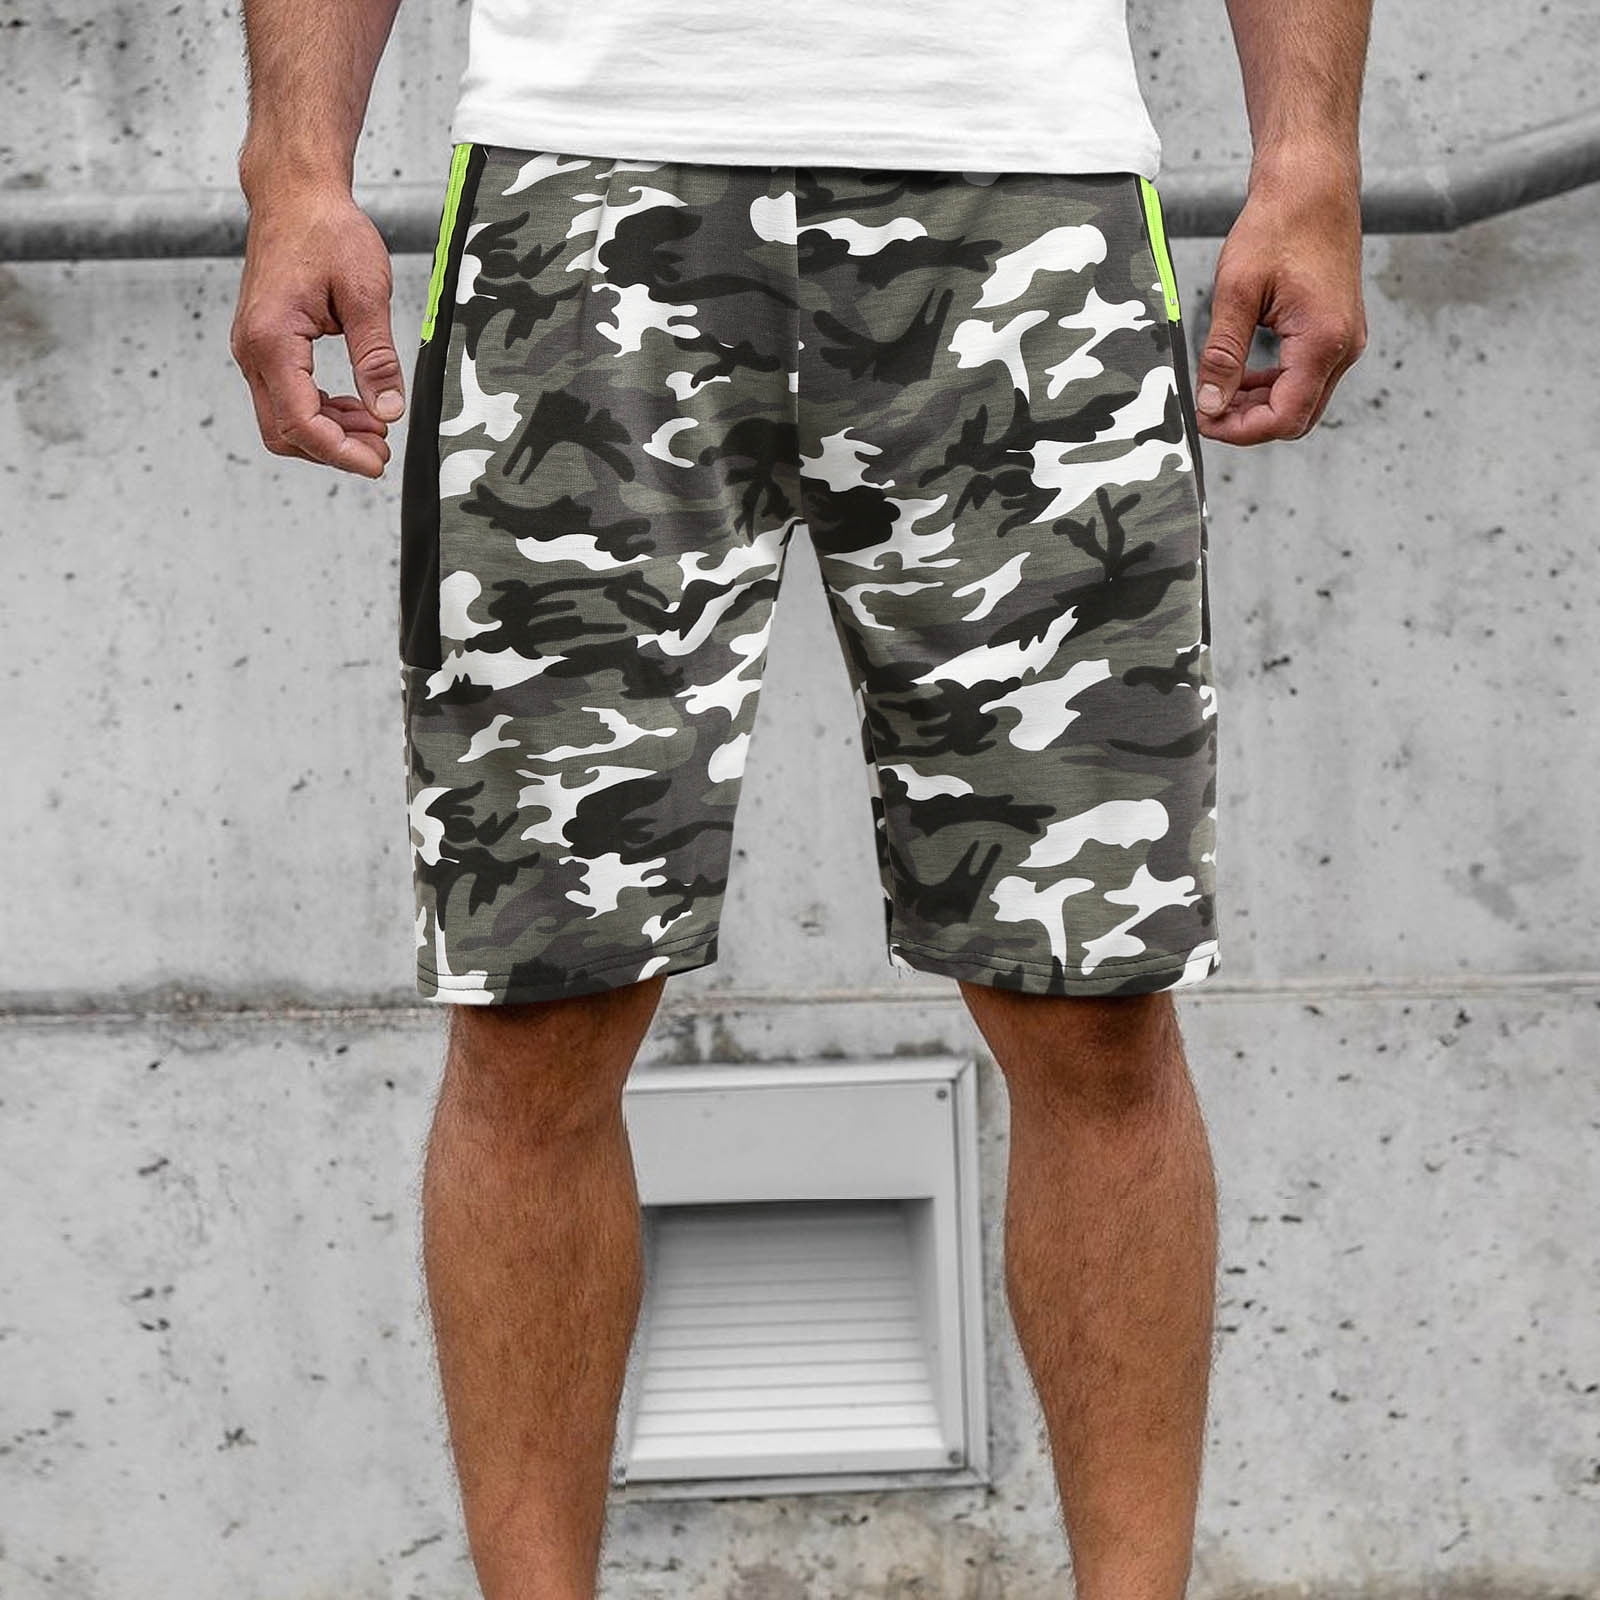 Move on Men Camouflage Drawstring Shorts Summer Sports Fitness Fifth Pants 